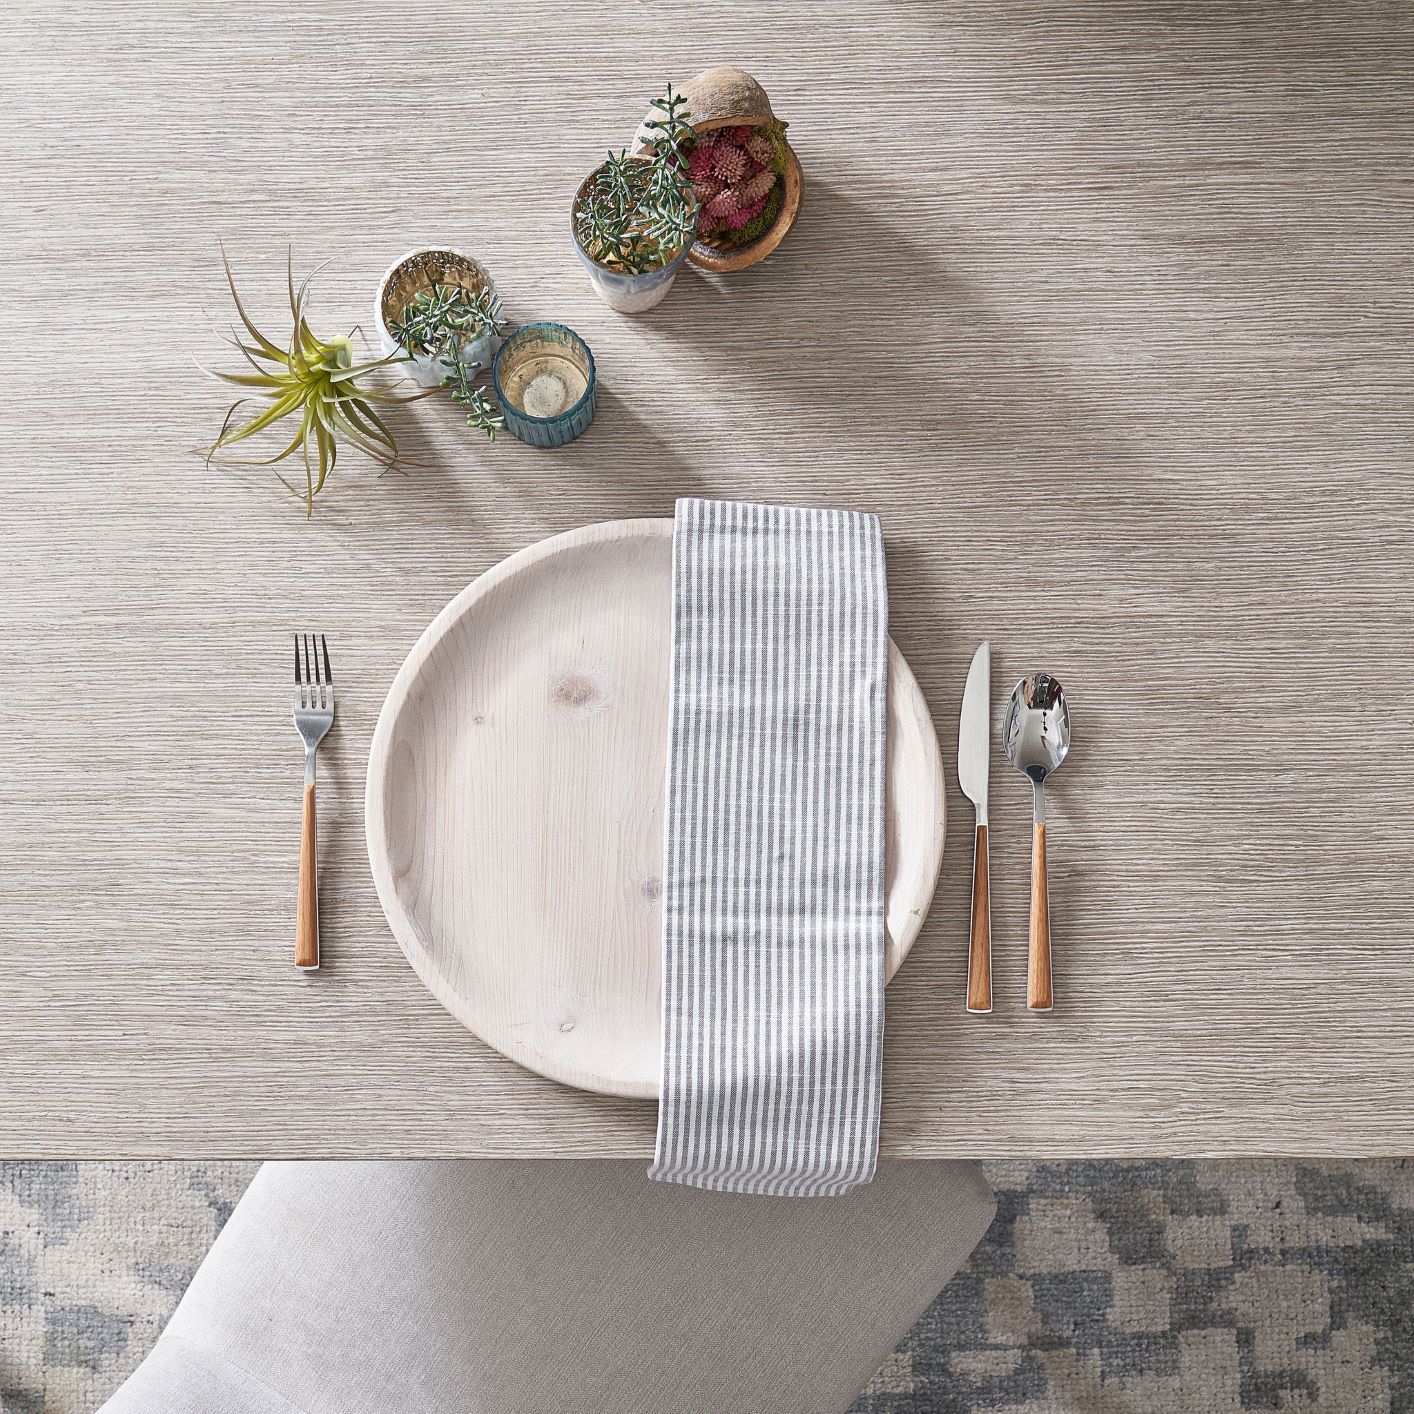 Image of a place setting on a dining room table